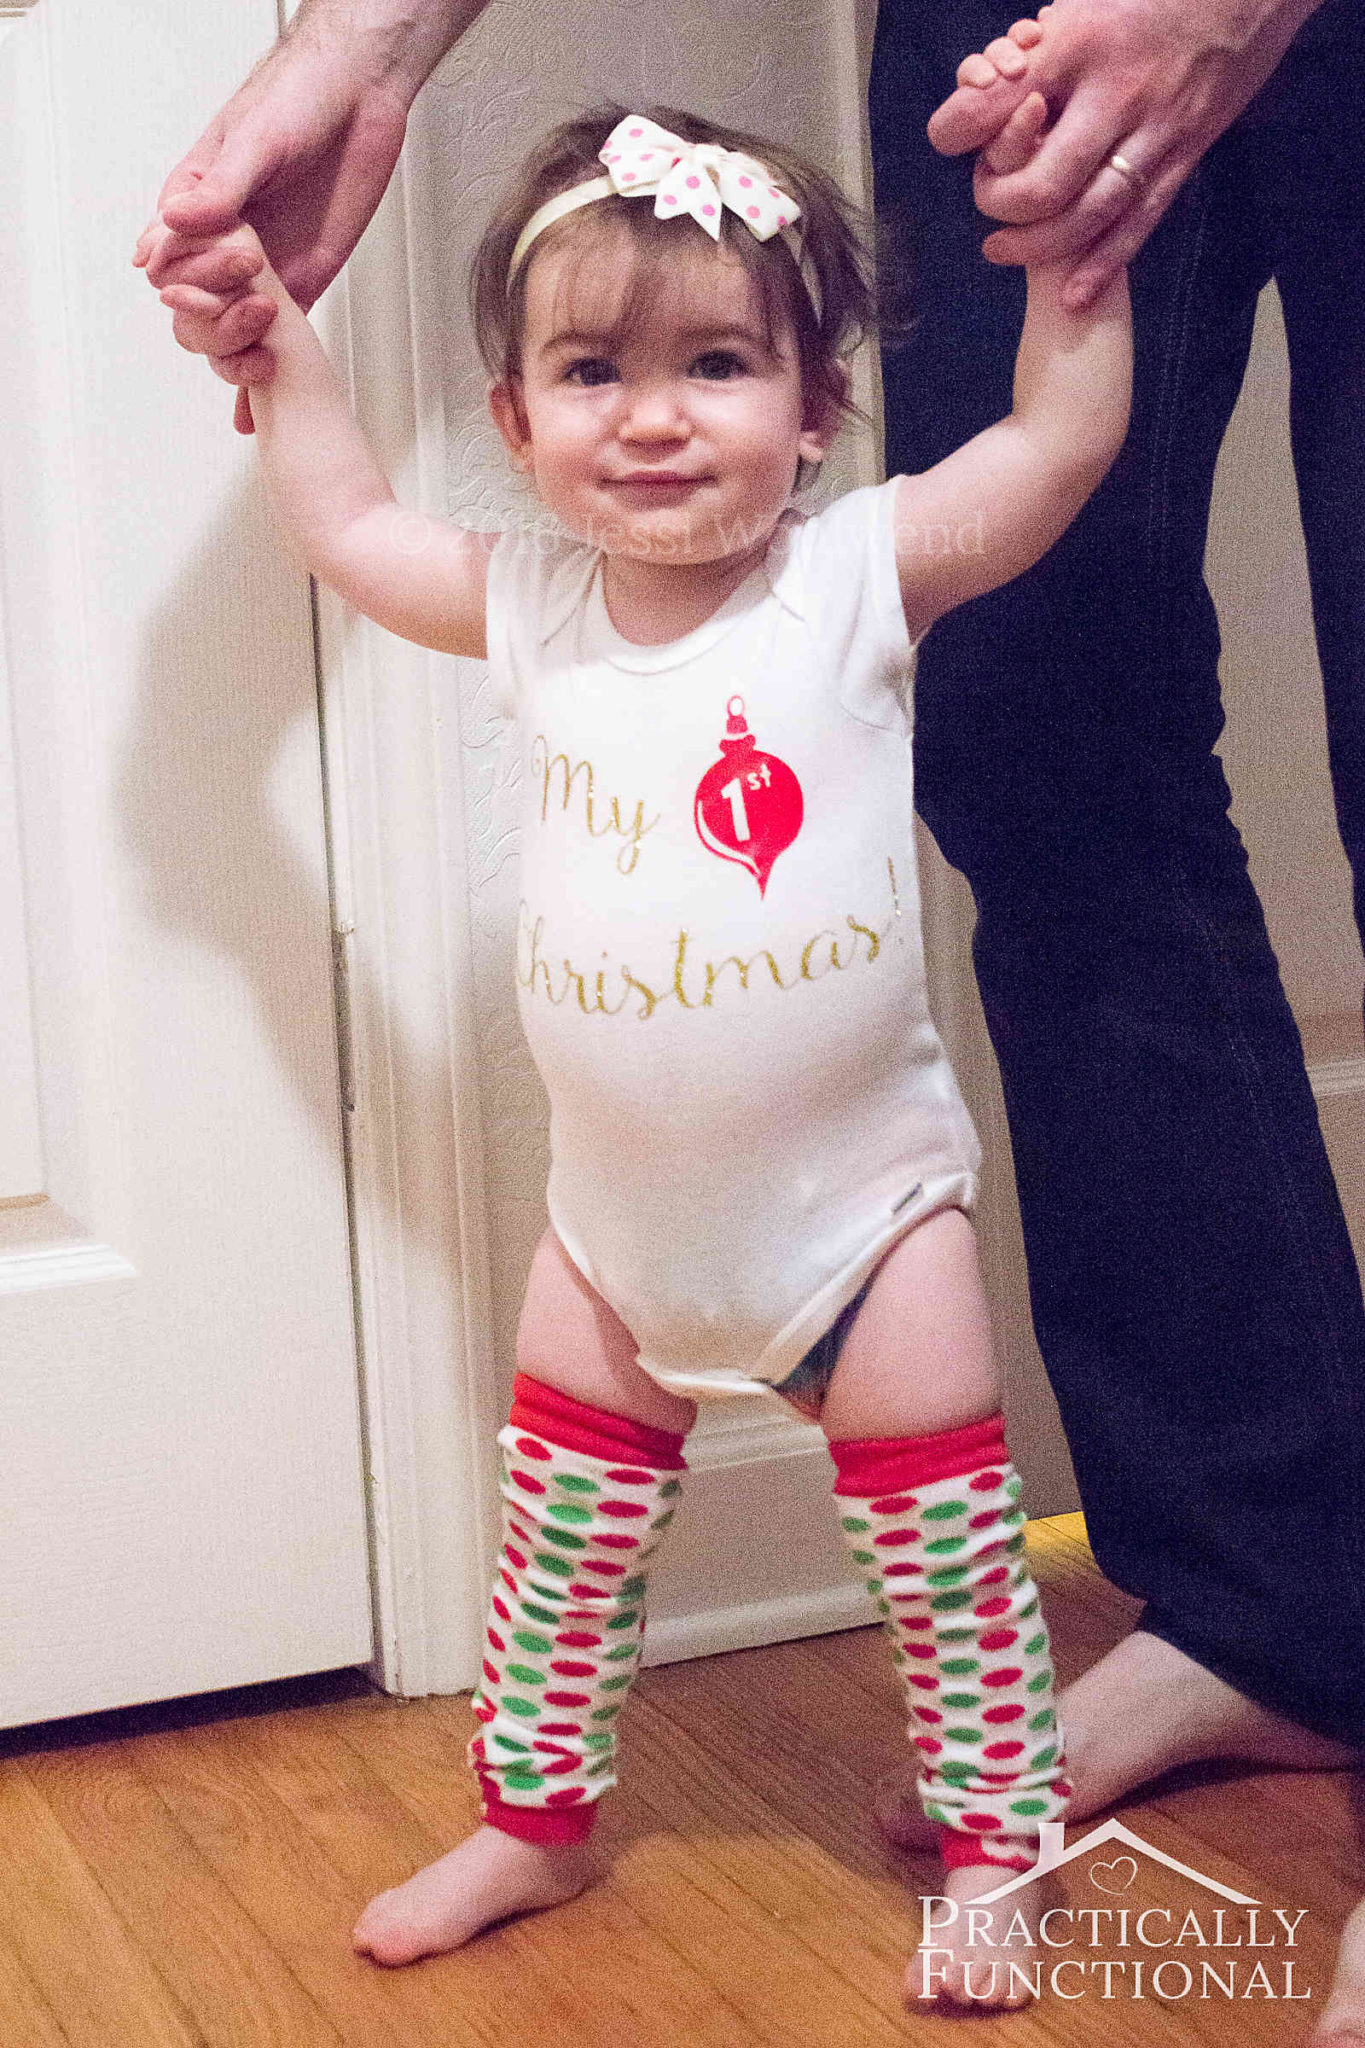 This My 1st Christmas onesie is such a great idea for a handmade gift for a baby shower or Christmas!